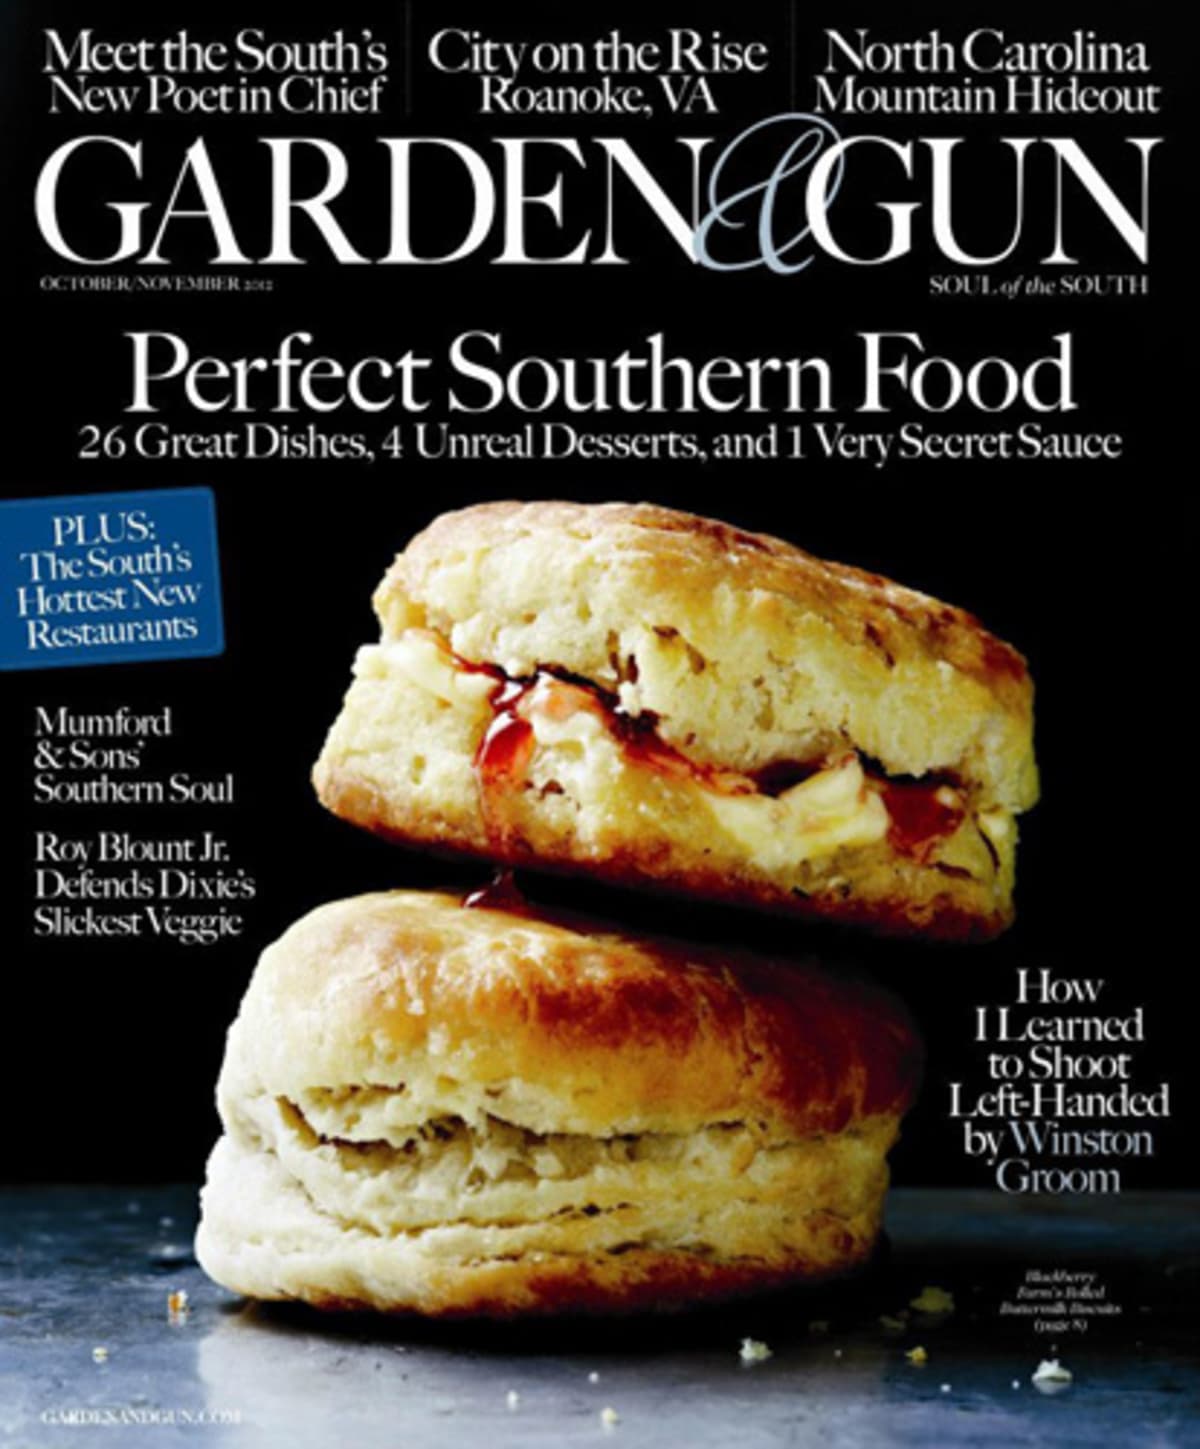 What Was the Best Food Magazine Cover of 2012? | First We Feast